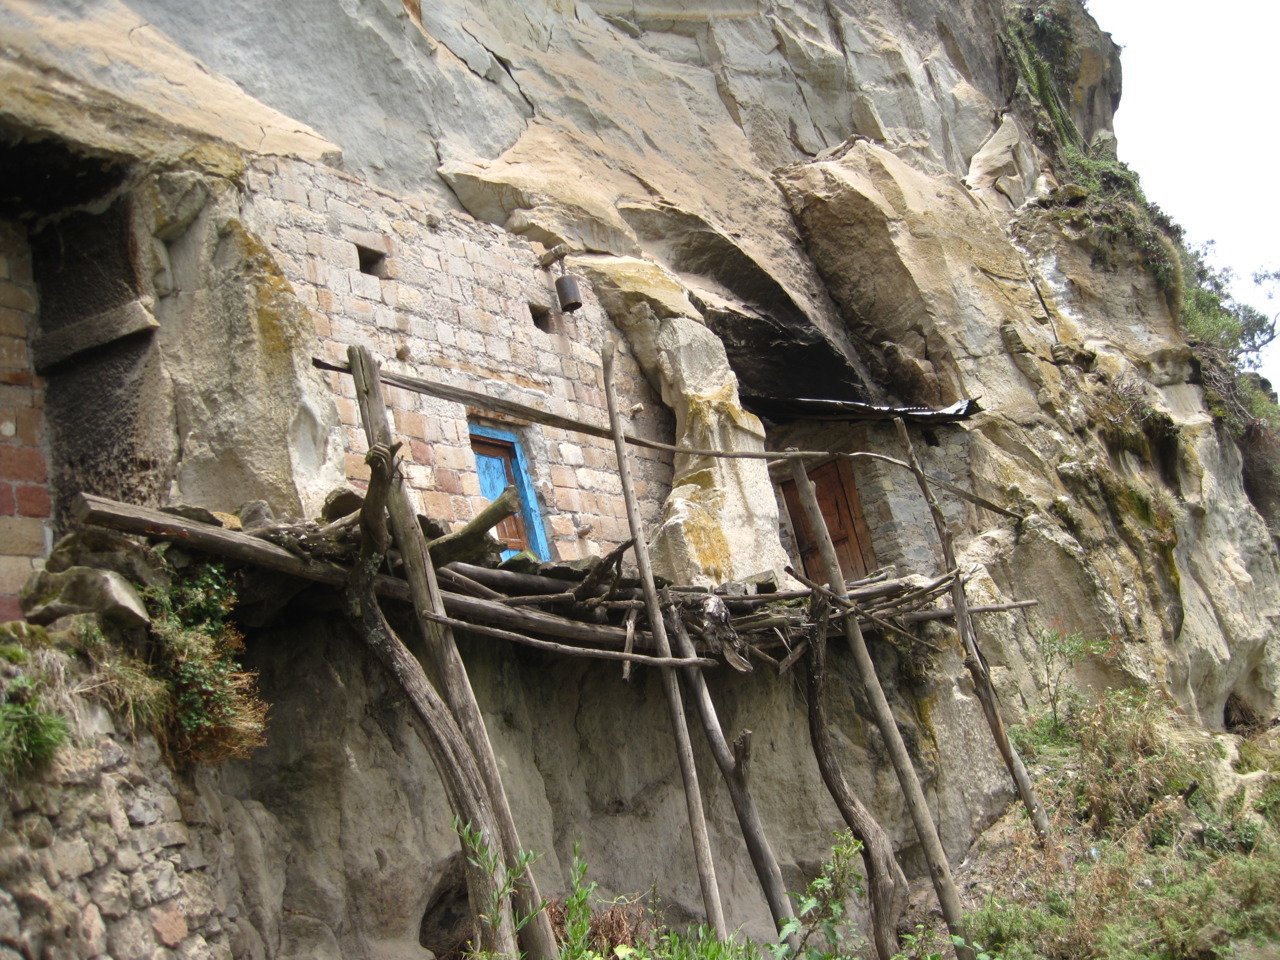 Rock carved dwelling near Lalibela, Ethiopia.
Contributed by Goran Grahovac